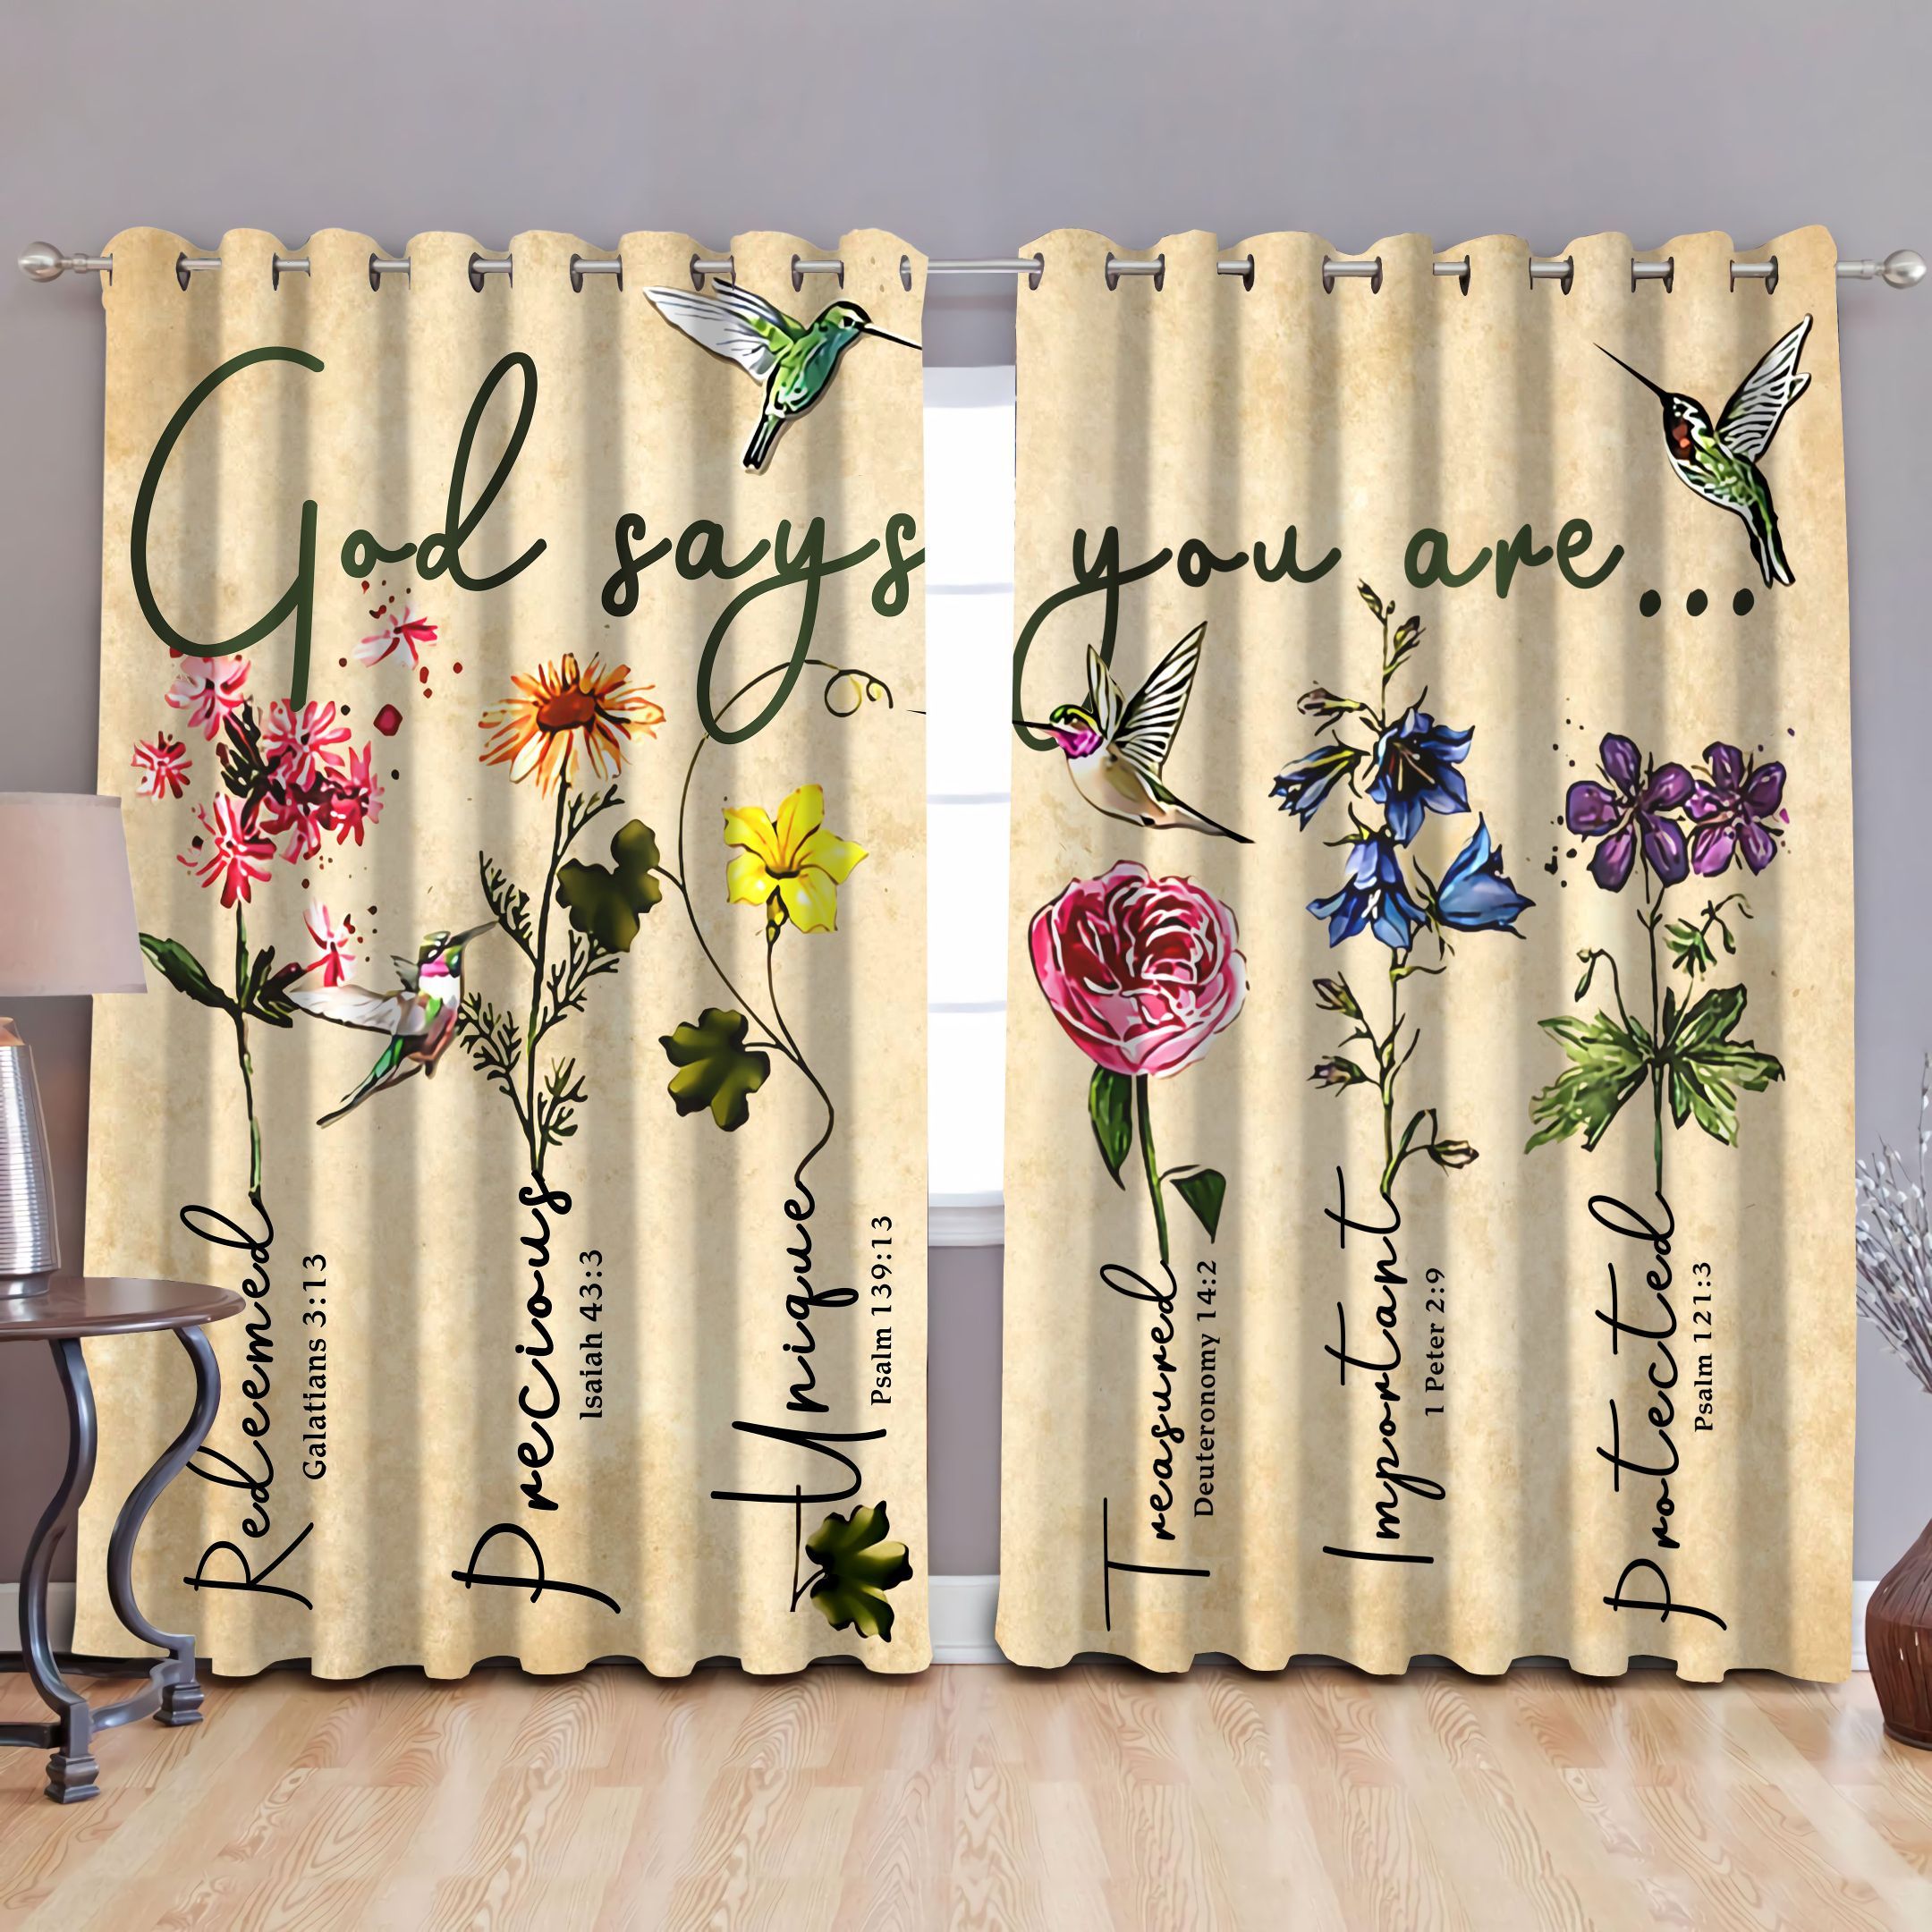 God Says You Are Humming Bird Printed Window Curtain